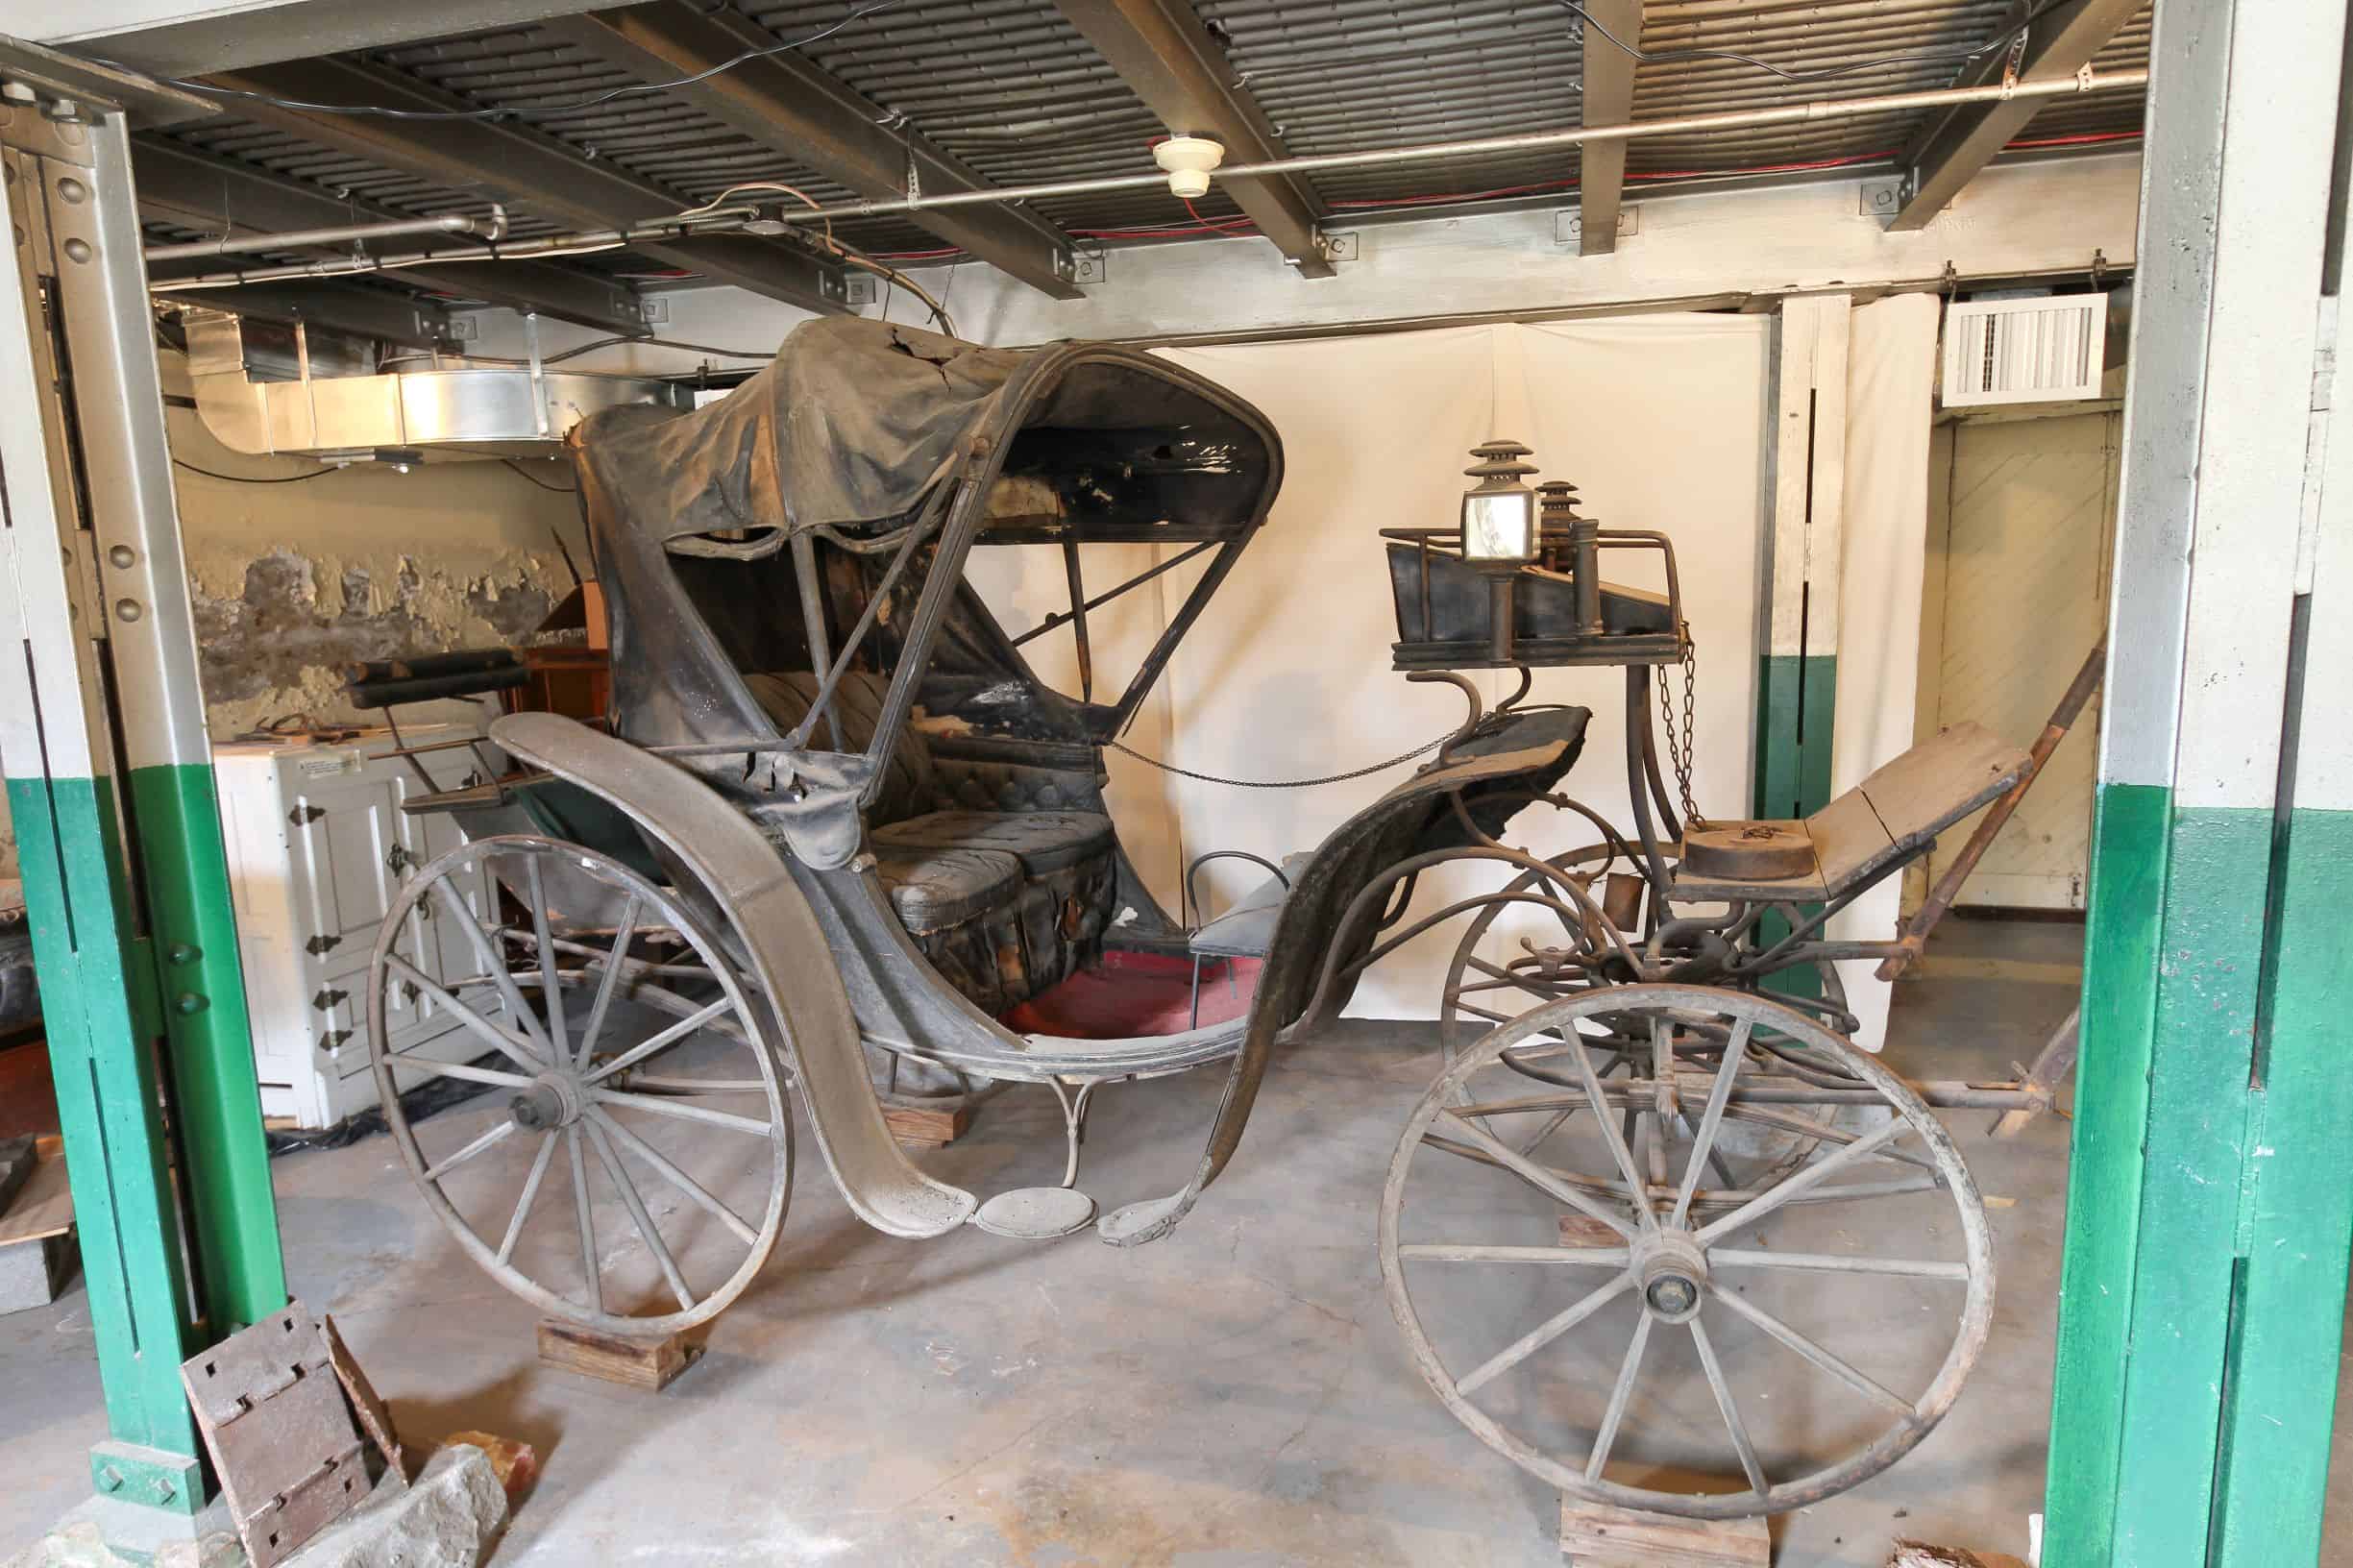 The carriage today, in the Study basement